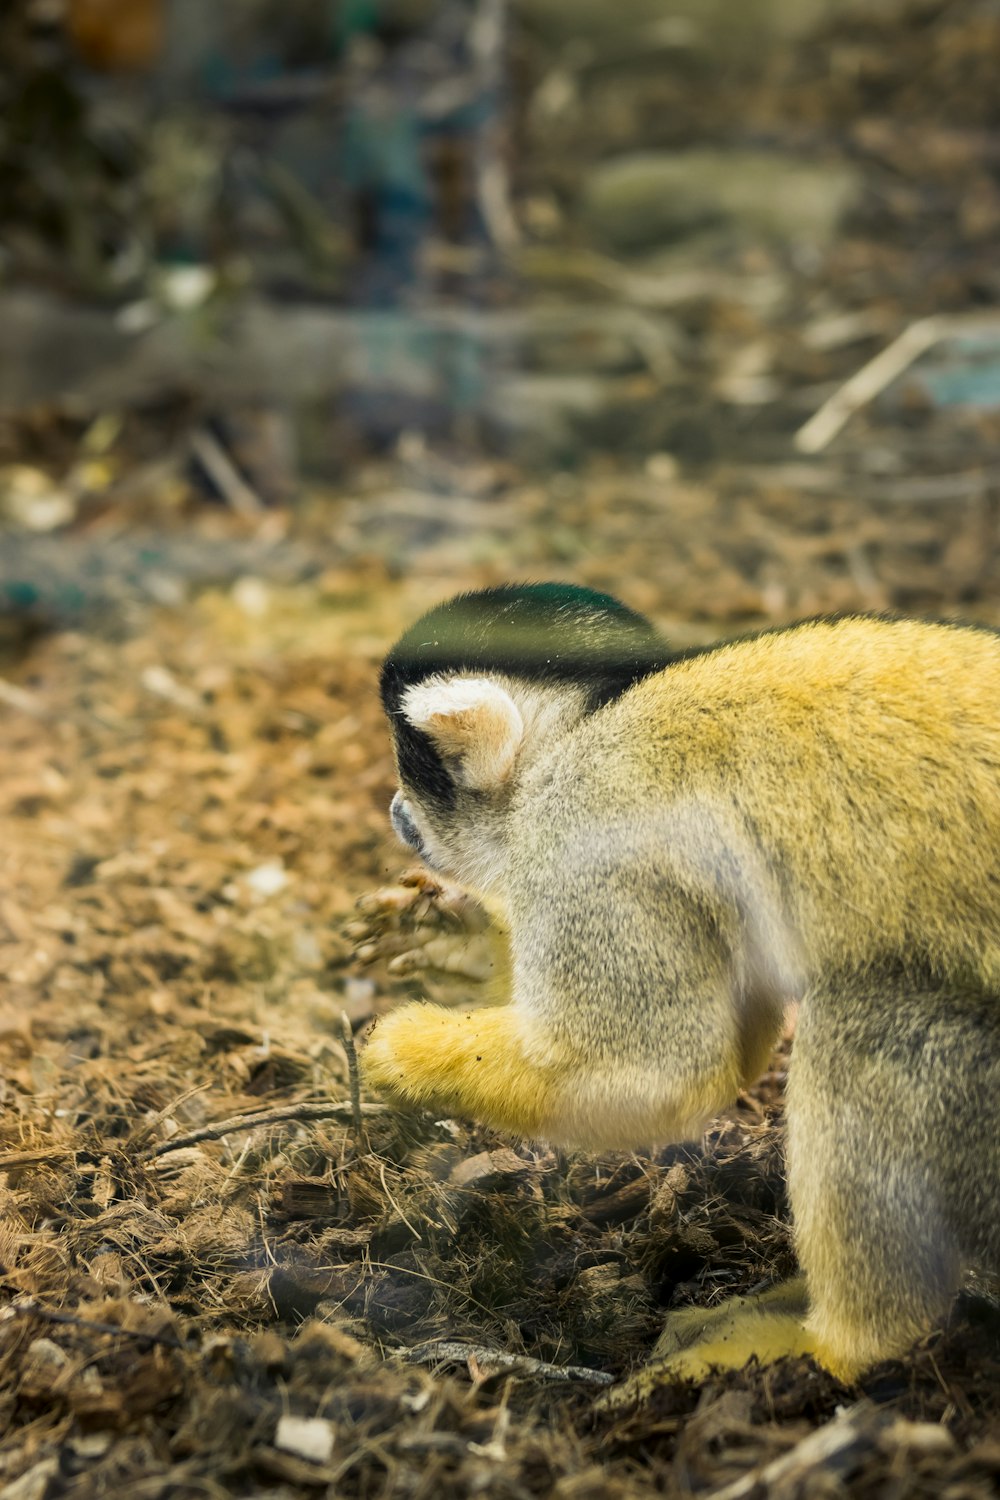 a small monkey with a green hat on its head